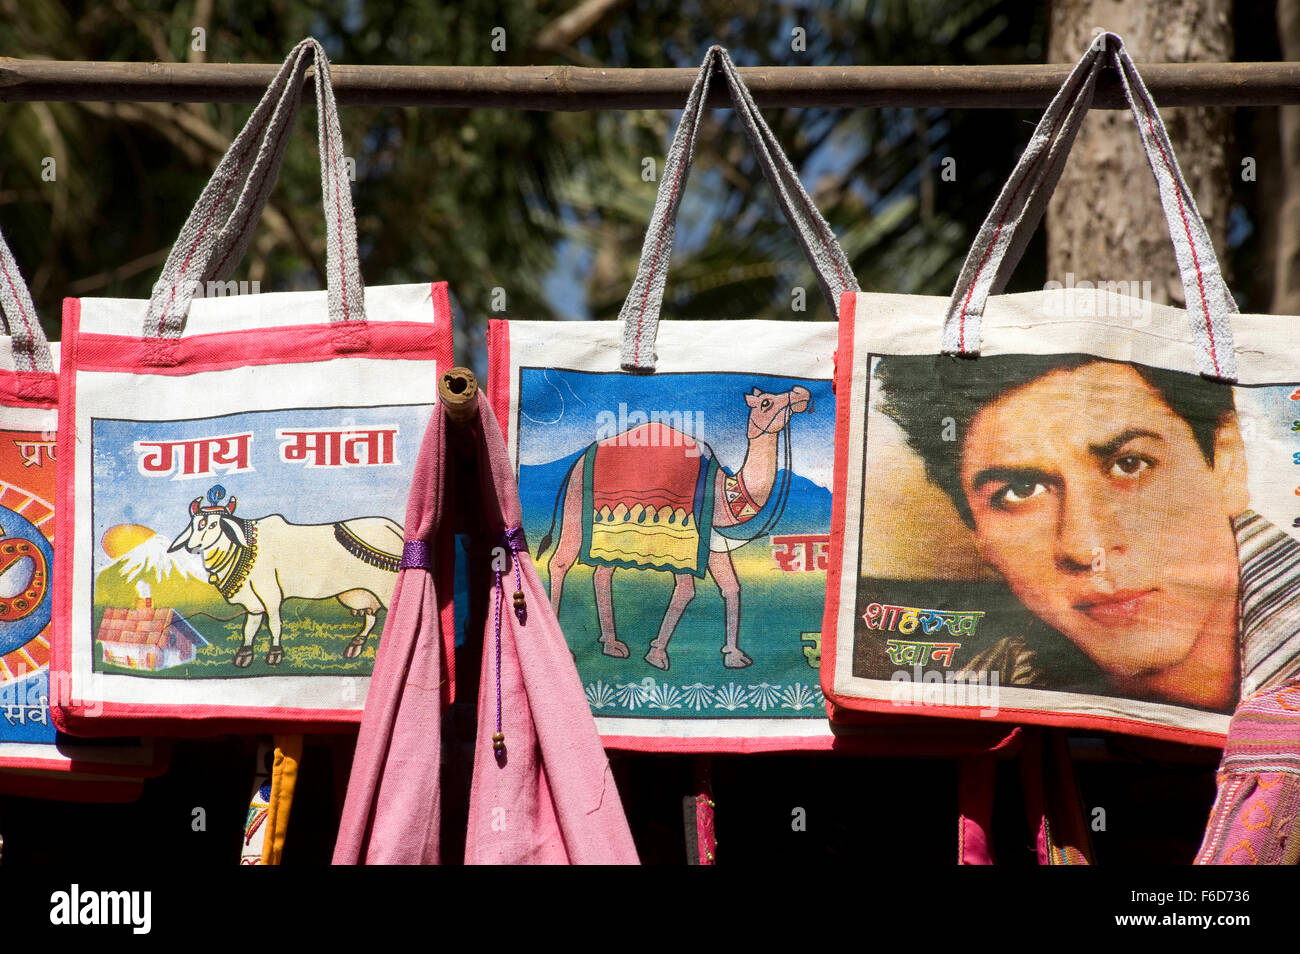 Painted cloth carry bags hanging on stall, palolem beach, goa, india, asia Stock Photo